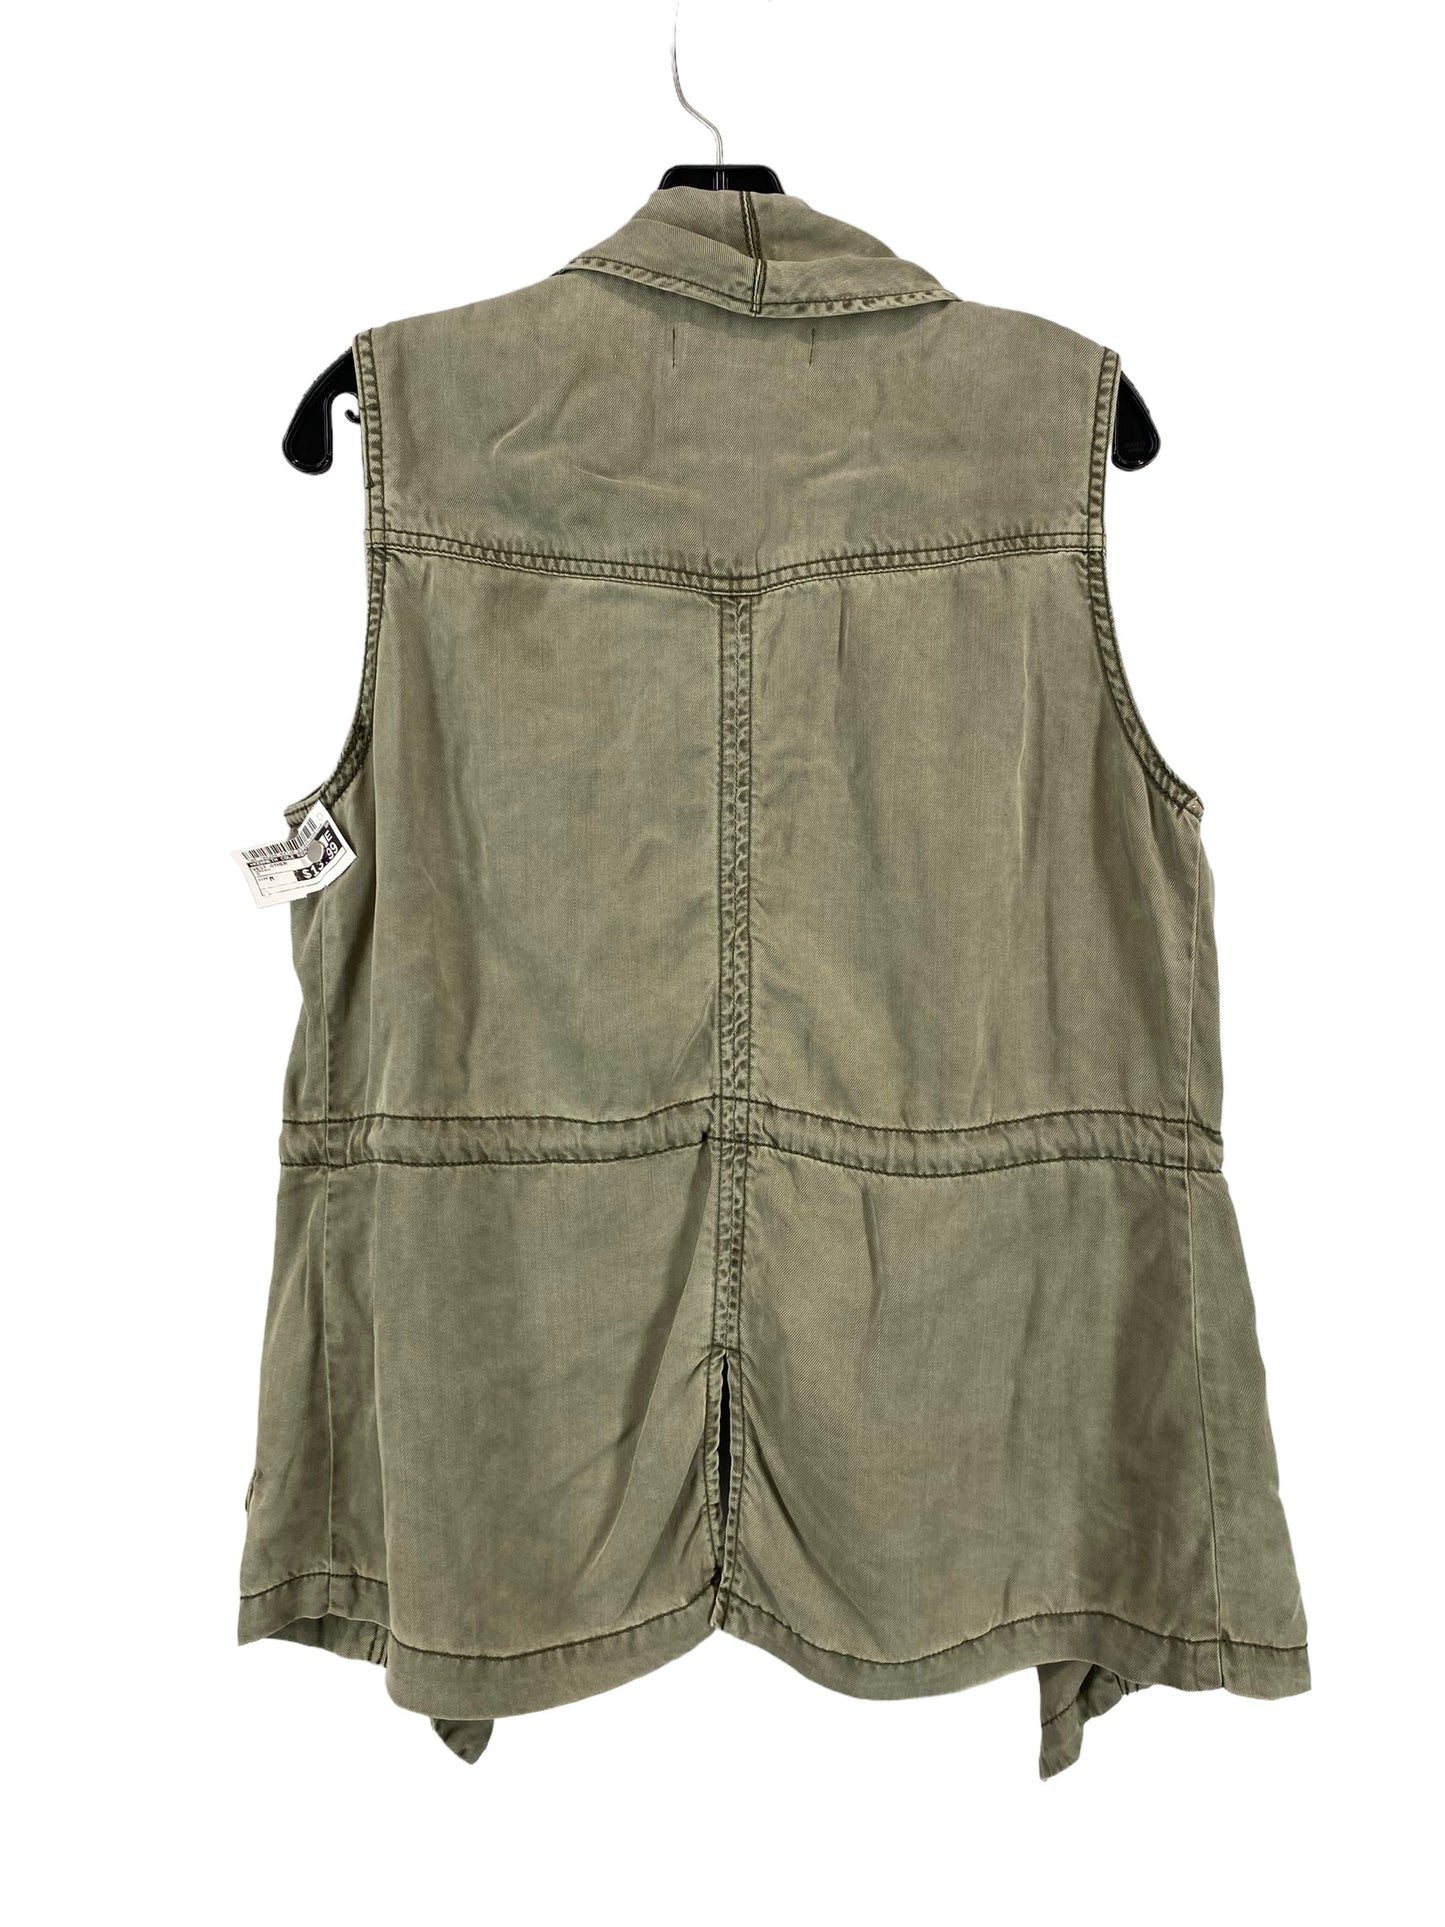 Vest Other By Kenneth Cole Reaction  Size: M